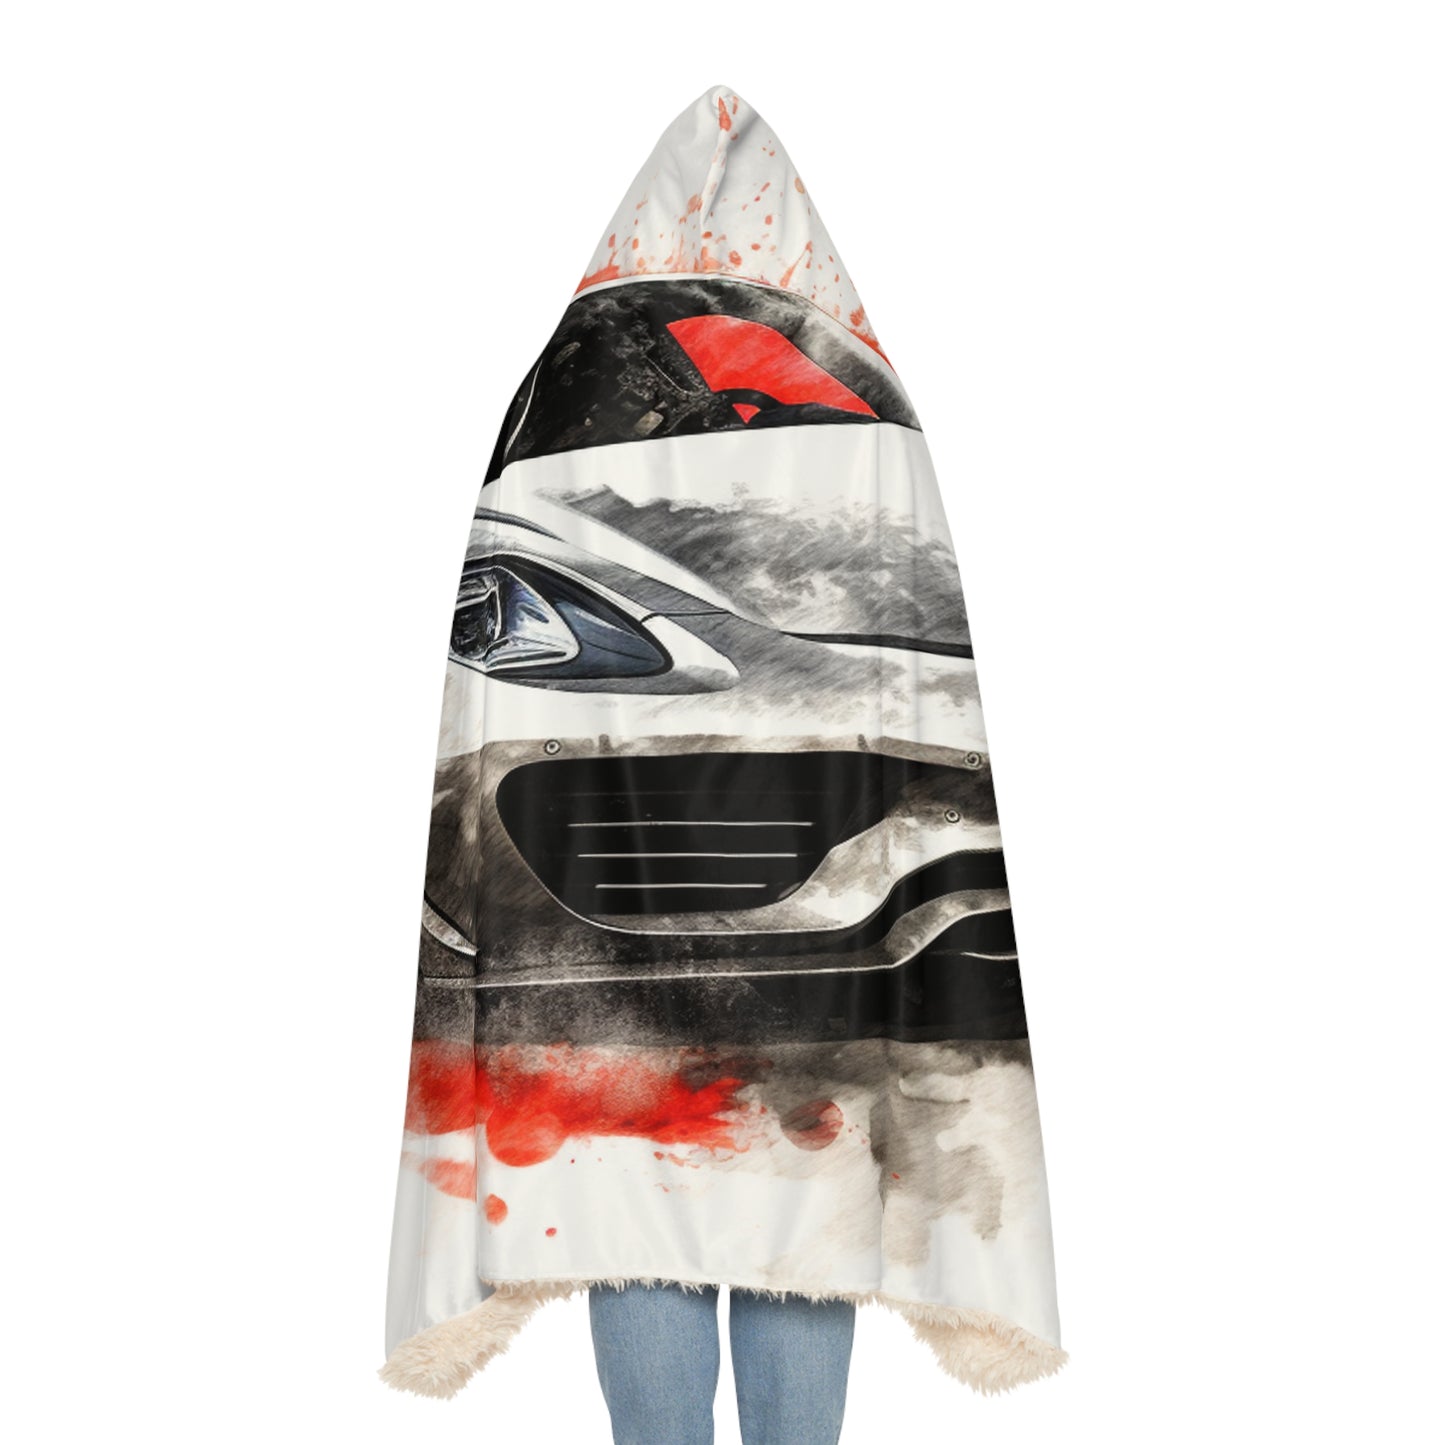 Snuggle Hooded Blanket 918 Spyder white background driving fast with water splashing 4